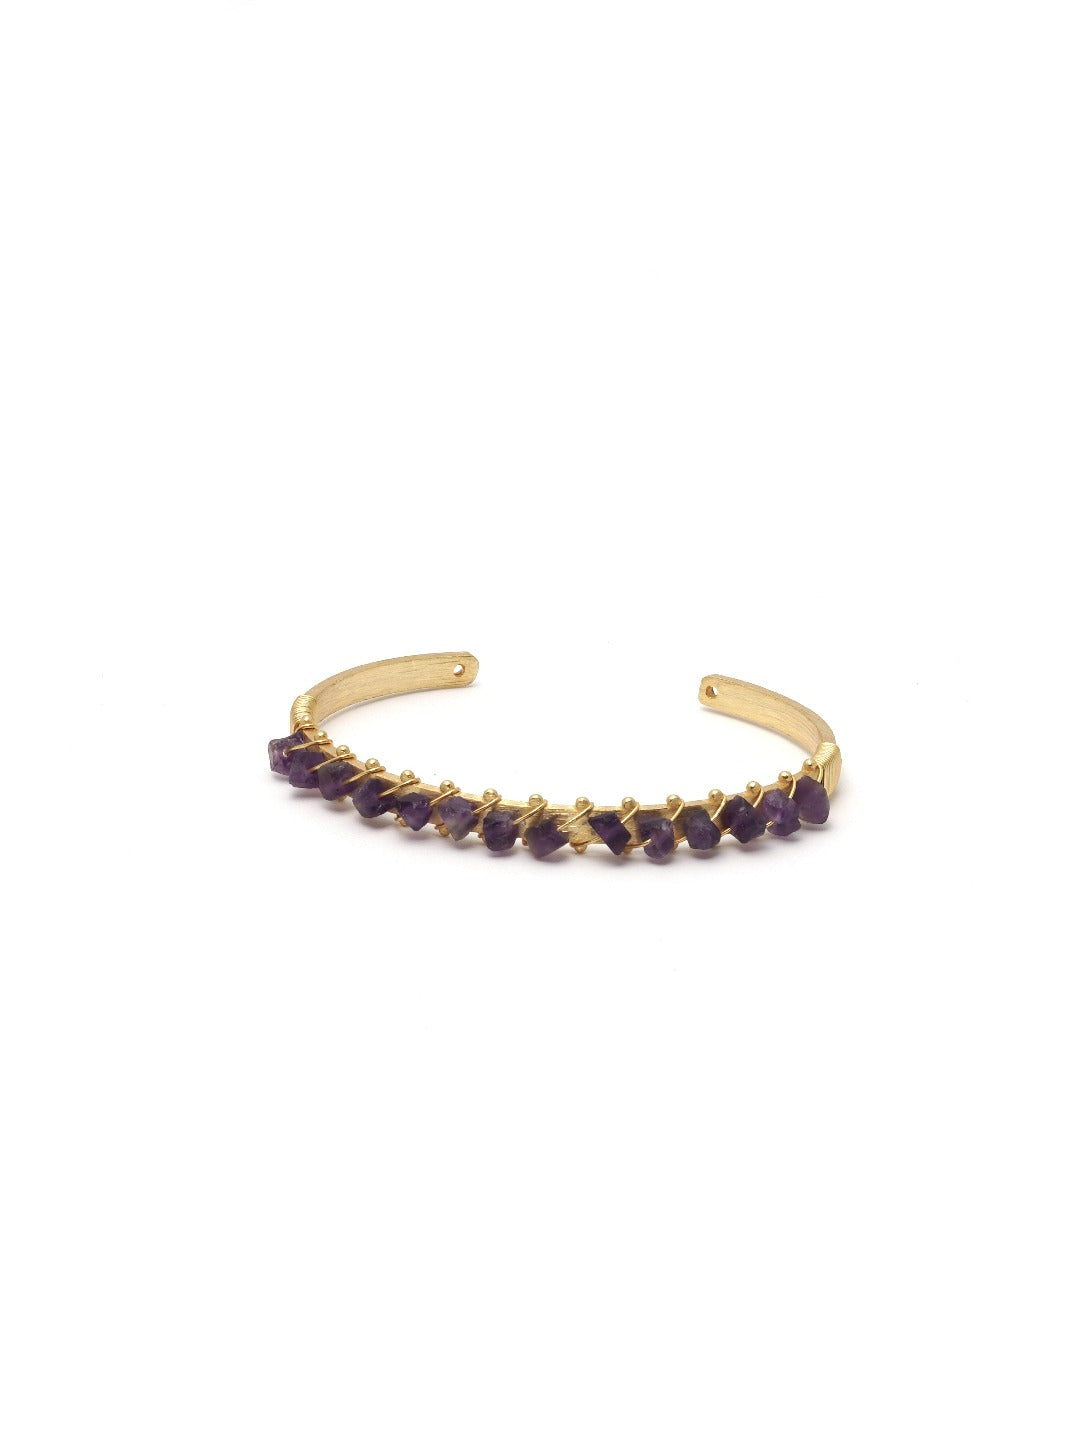 Gold Plated Gemstone Handcuff - QUEENS JEWELS